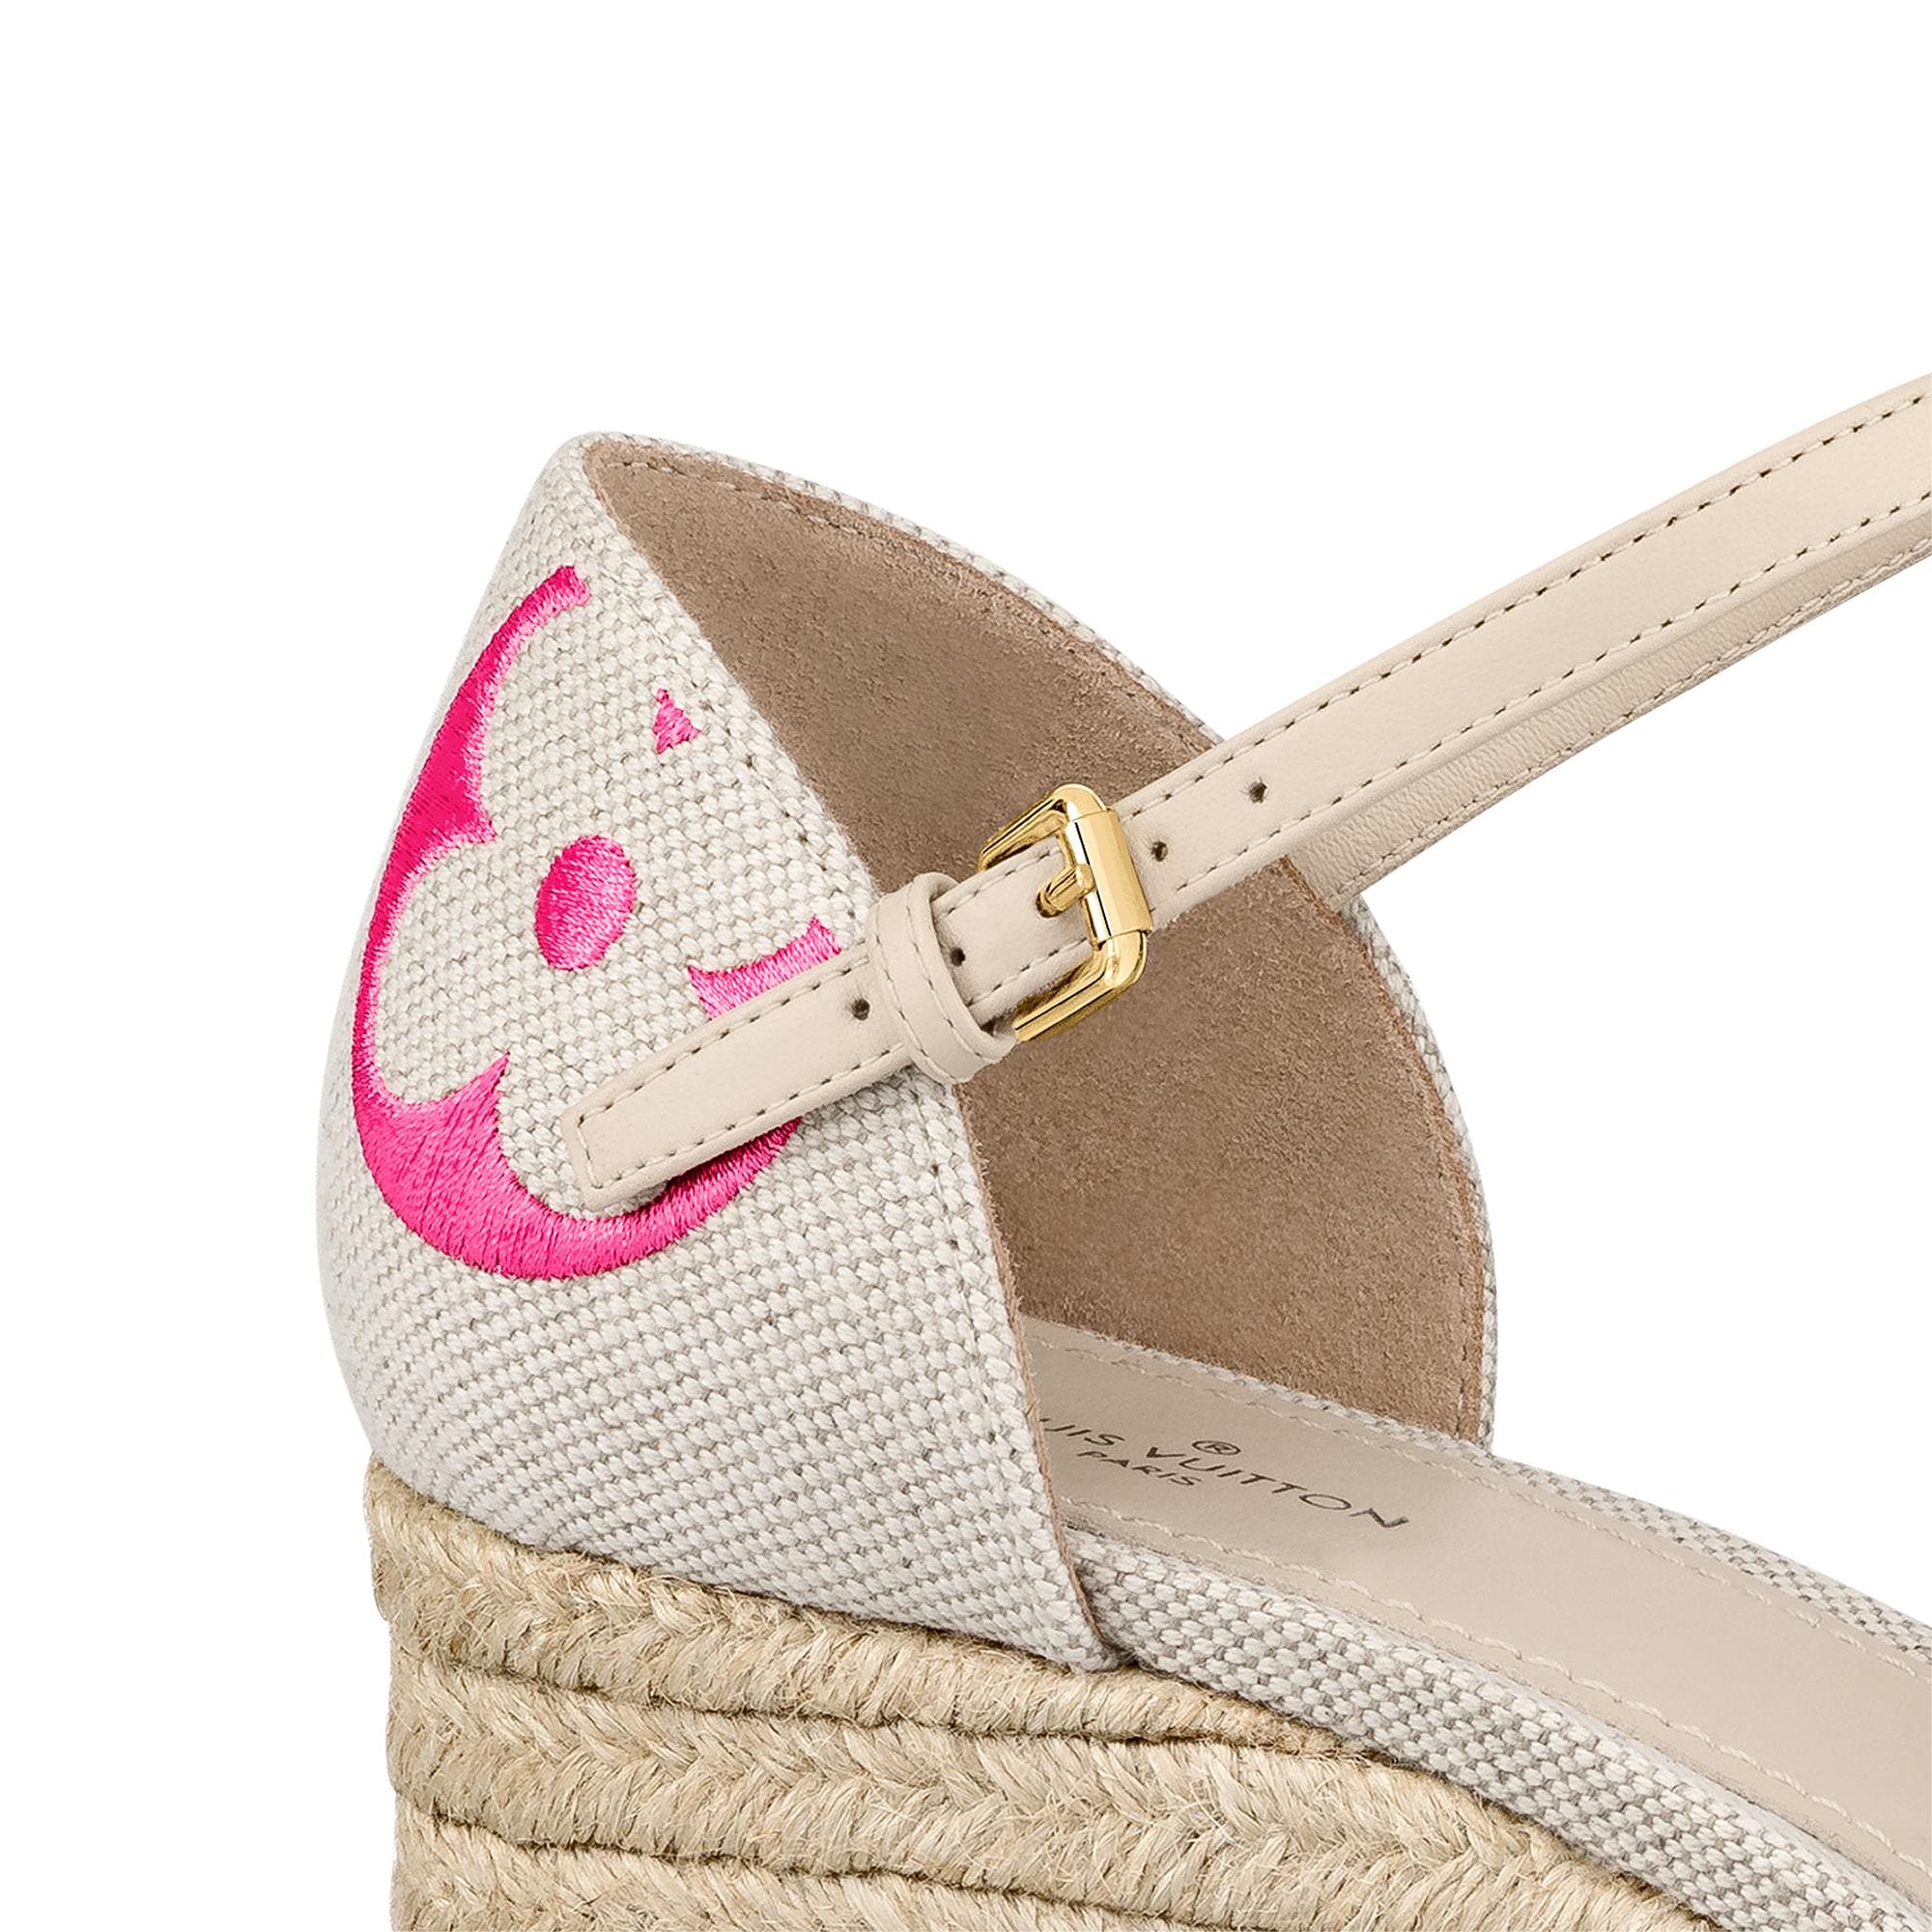 Louis Vuitton Pink Monogram Canvas and Leather Starboard Espadrille Wedge  Pumps Size 38